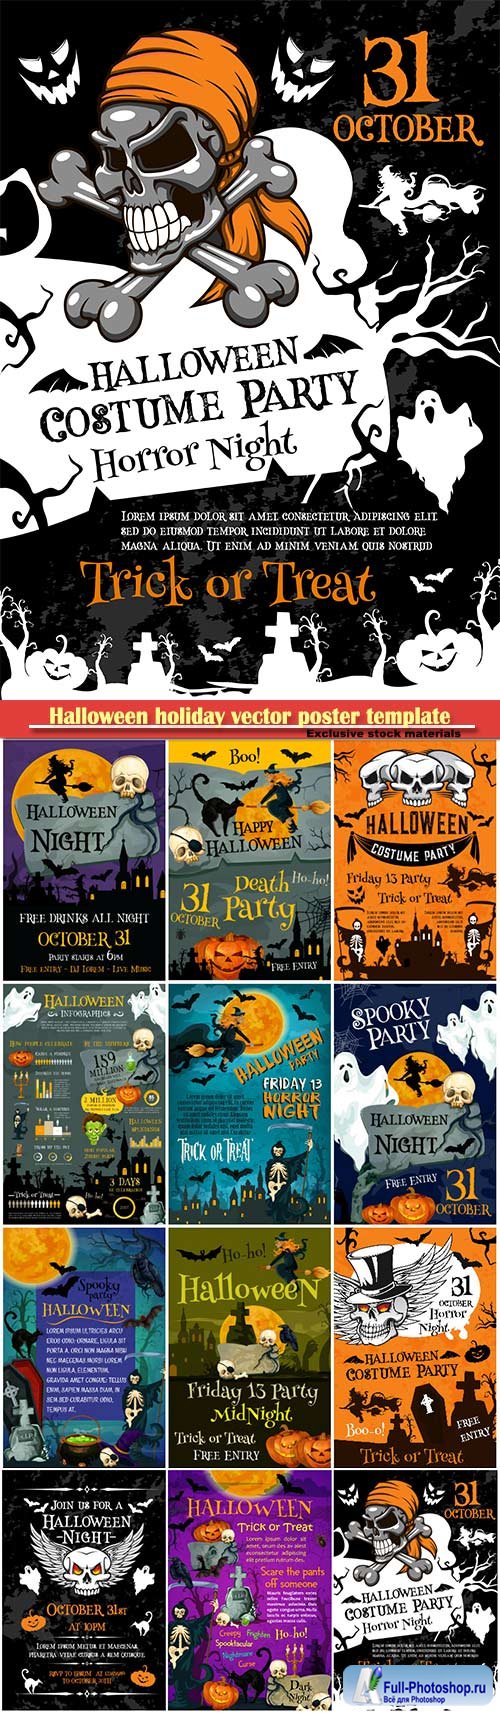 Halloween holiday vector poster template, scary pumpkin lantern and bat, spooky skeleton skull and death scythe, black cat and spider web on cemetery grave banner for october holiday design